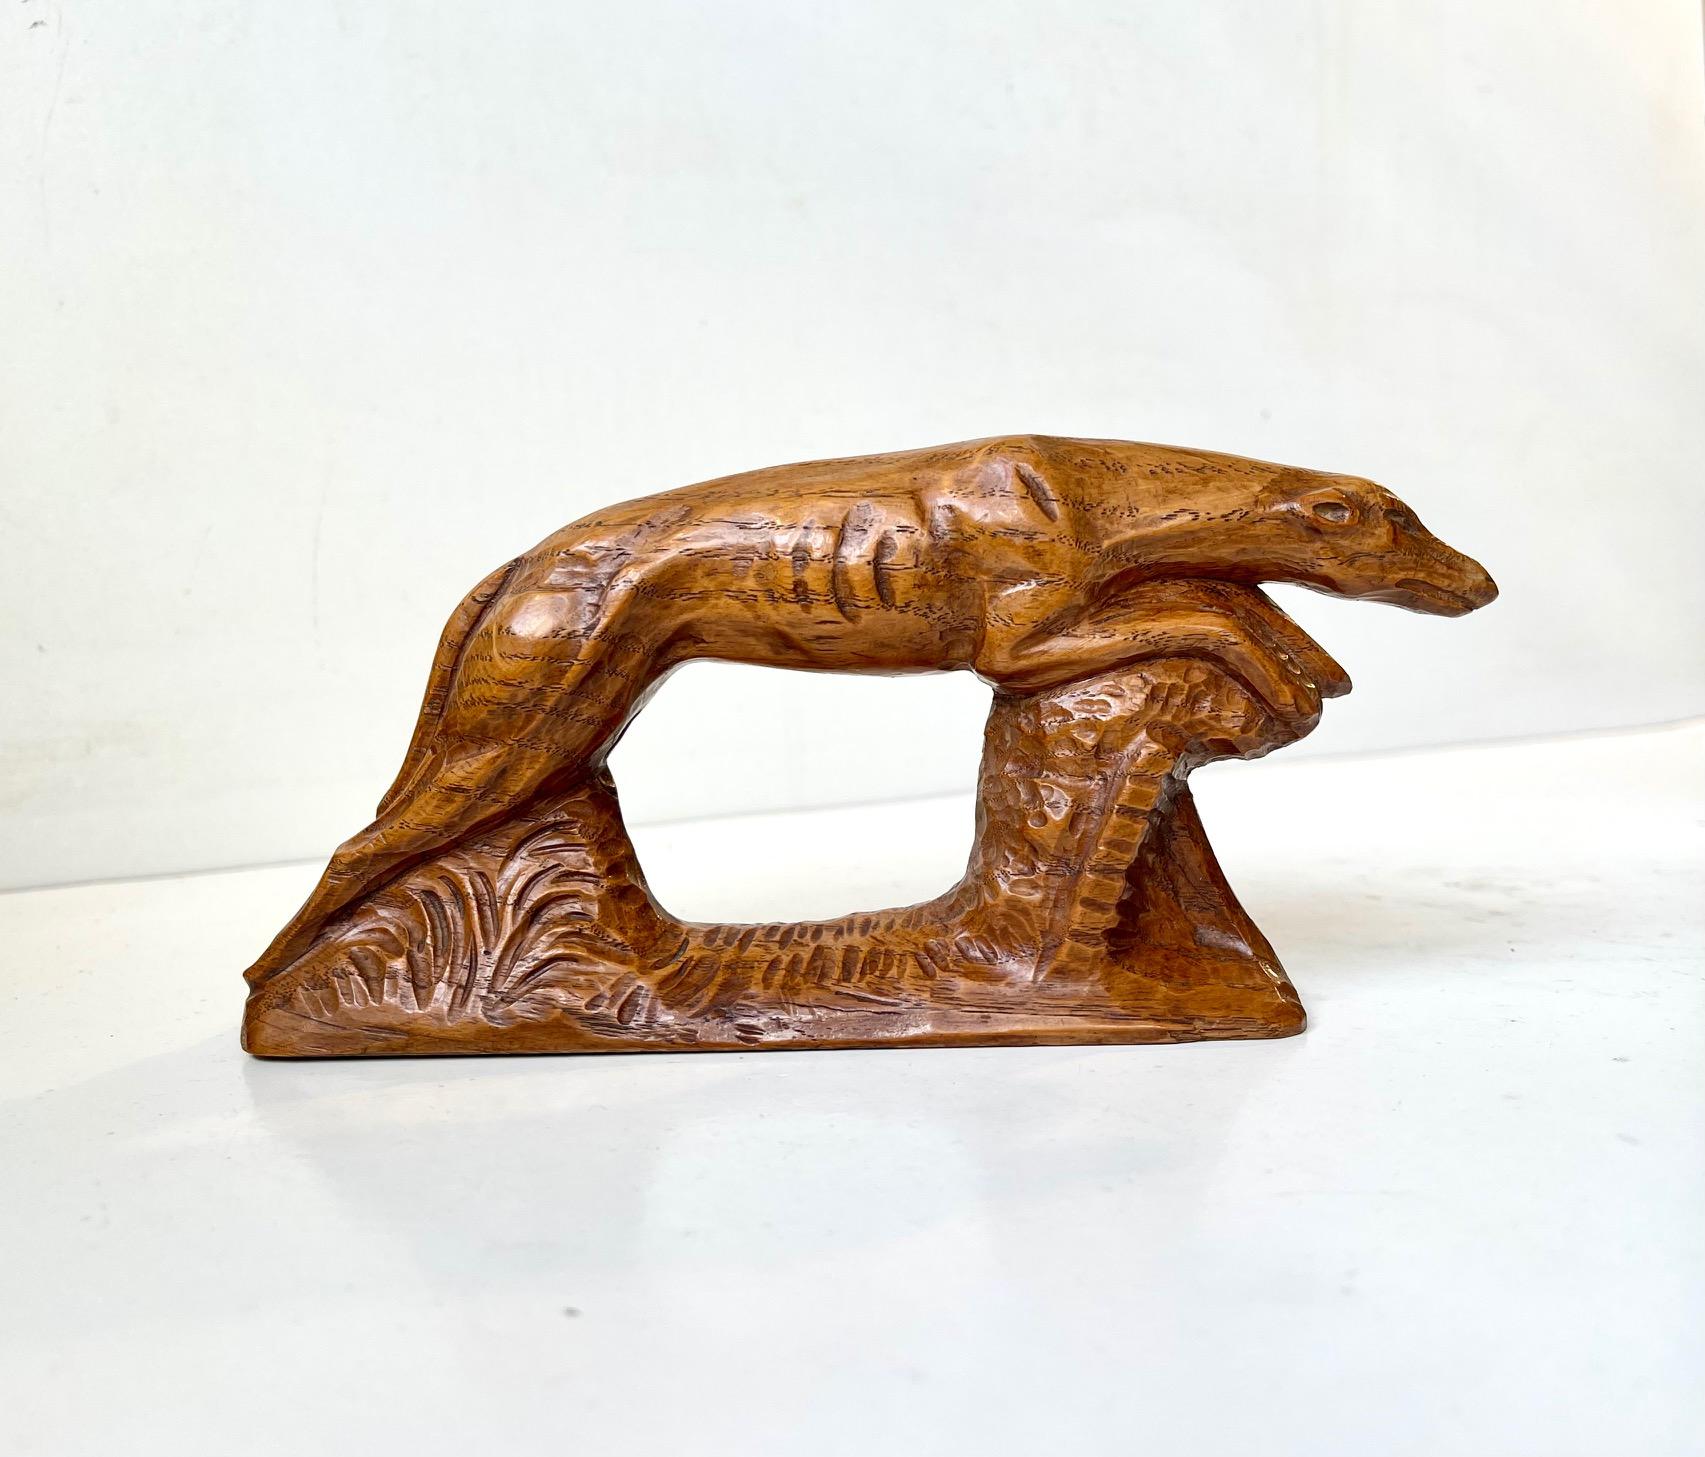 A skillfully hand carved figurine of a running Greyhound or Whippet. Beautiful details and a rich golden patina to the oak. Made by an anonymous craftsman in Scandinavia circa 1900-20. Measurements: W: 18.5, D: 4, H: 9 cm.